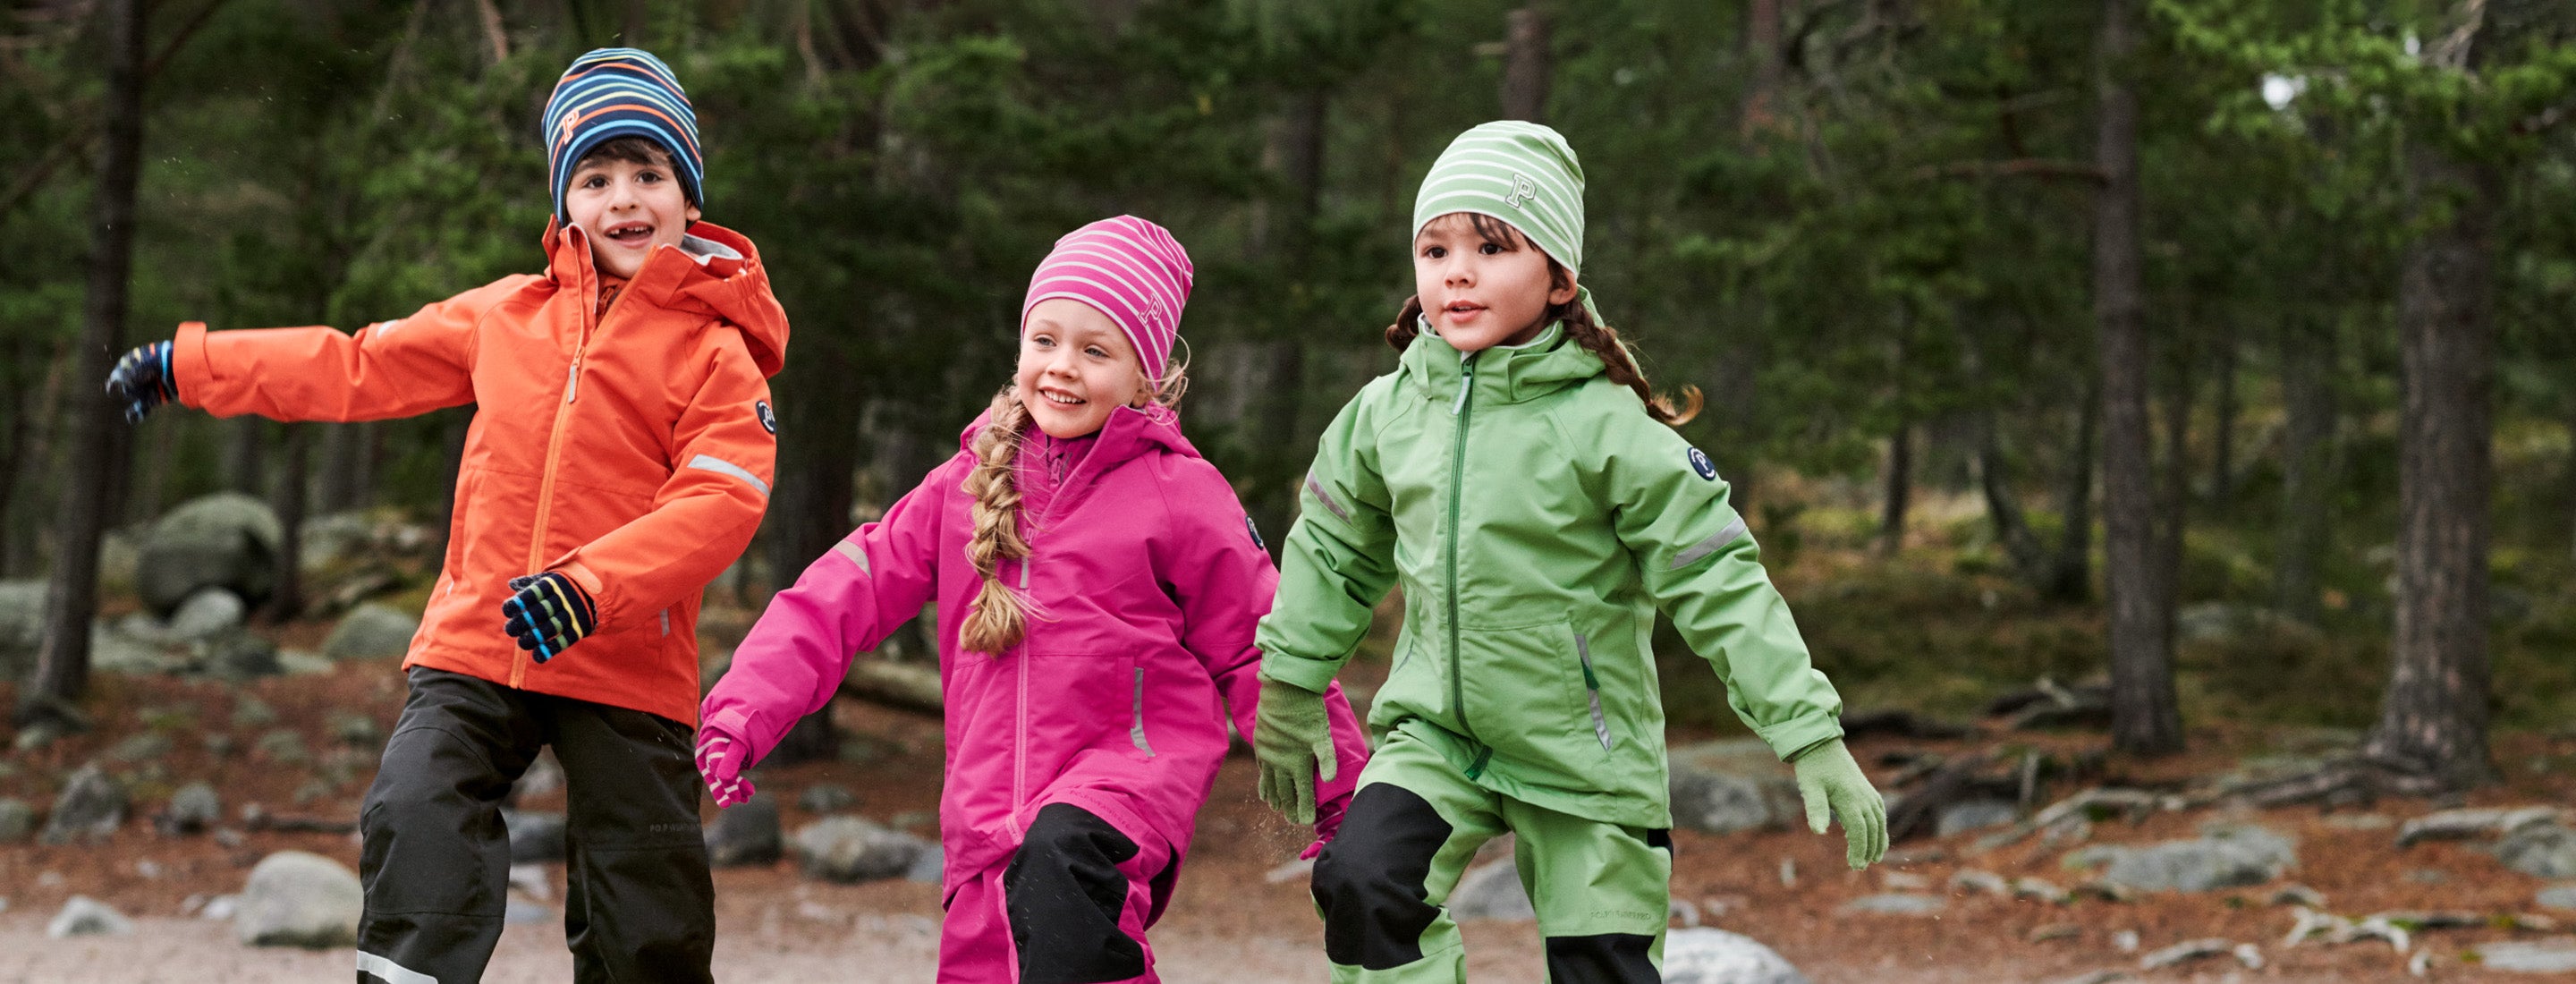 Three children in a forest wearing Polarn O. Pyret windbreakers and beanies  